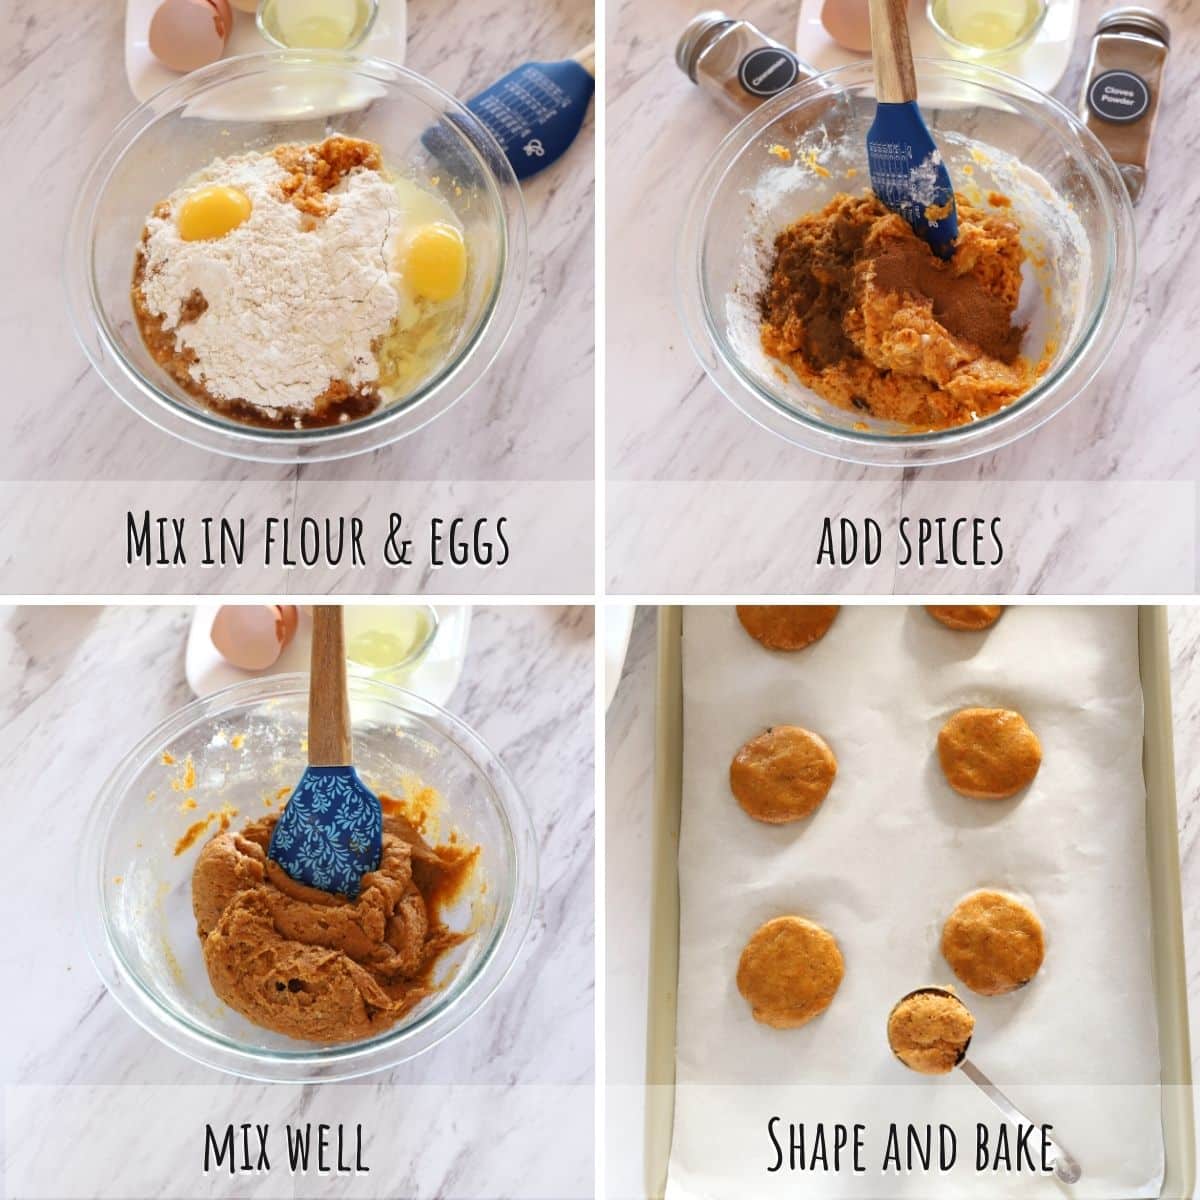 A collage of 4 images showing how to shape and bake sweet potato cookies.